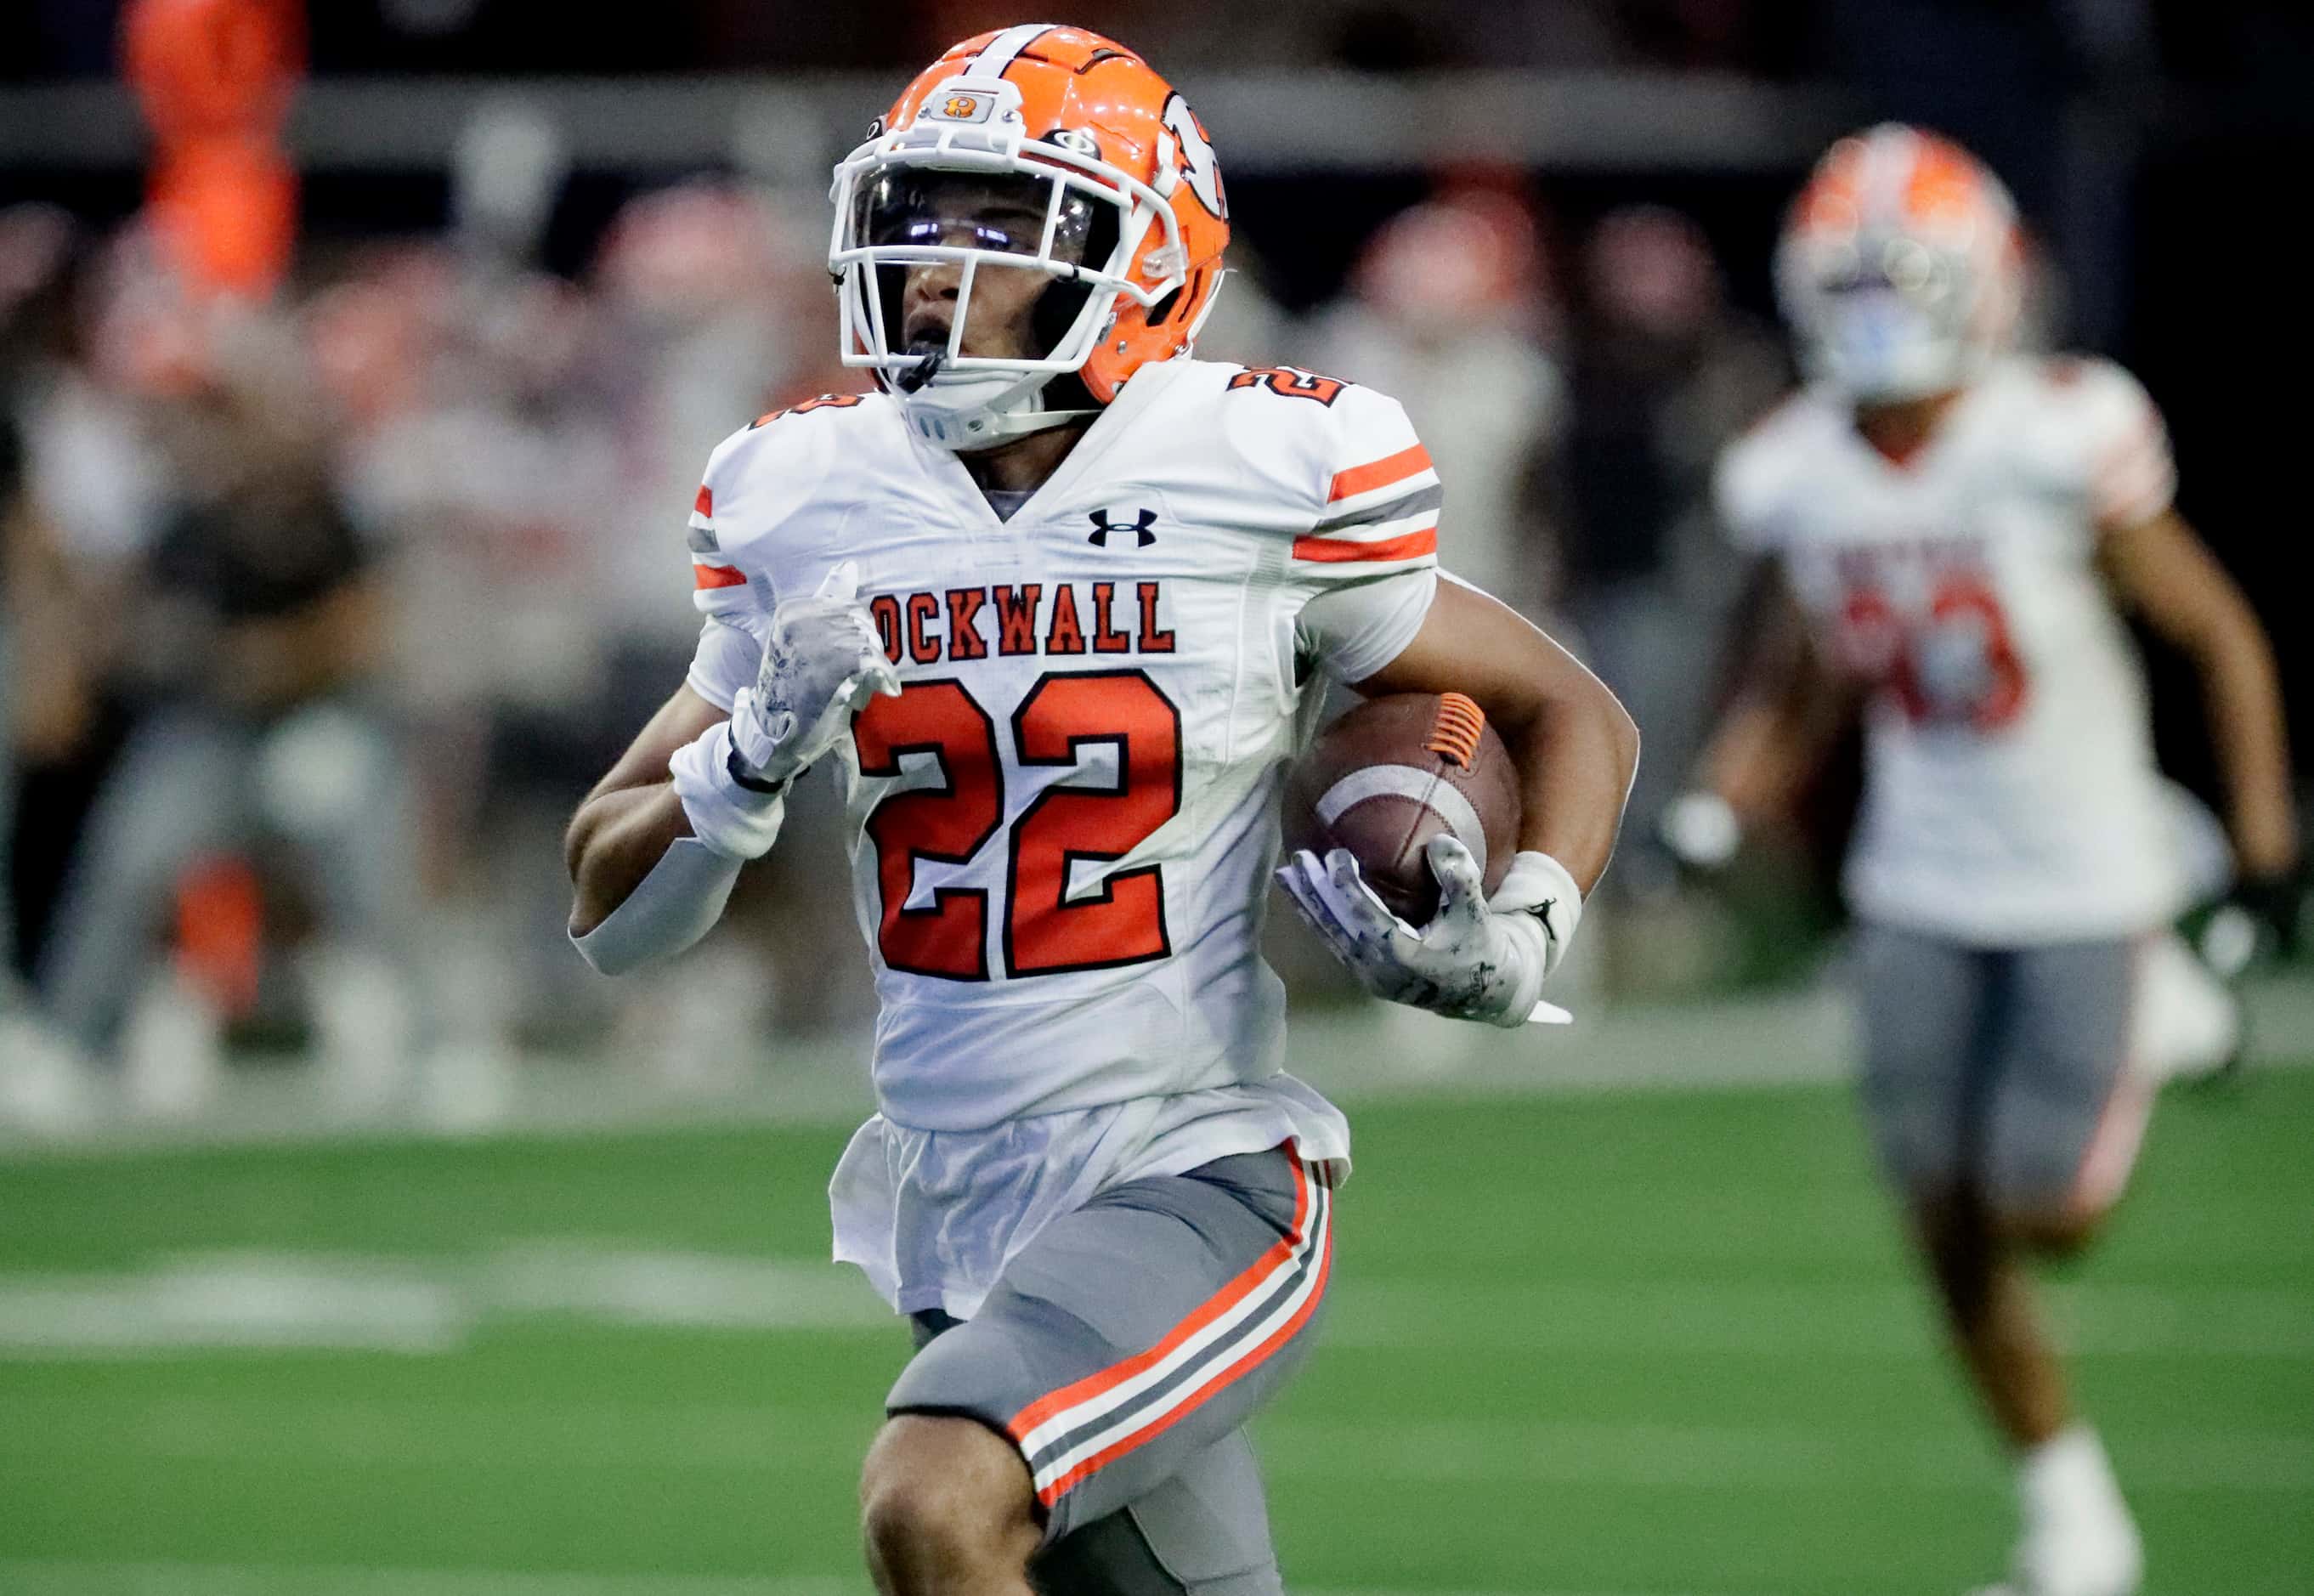 Rockwall High School running back Parker Williams (22) scores a touchdown during the first...